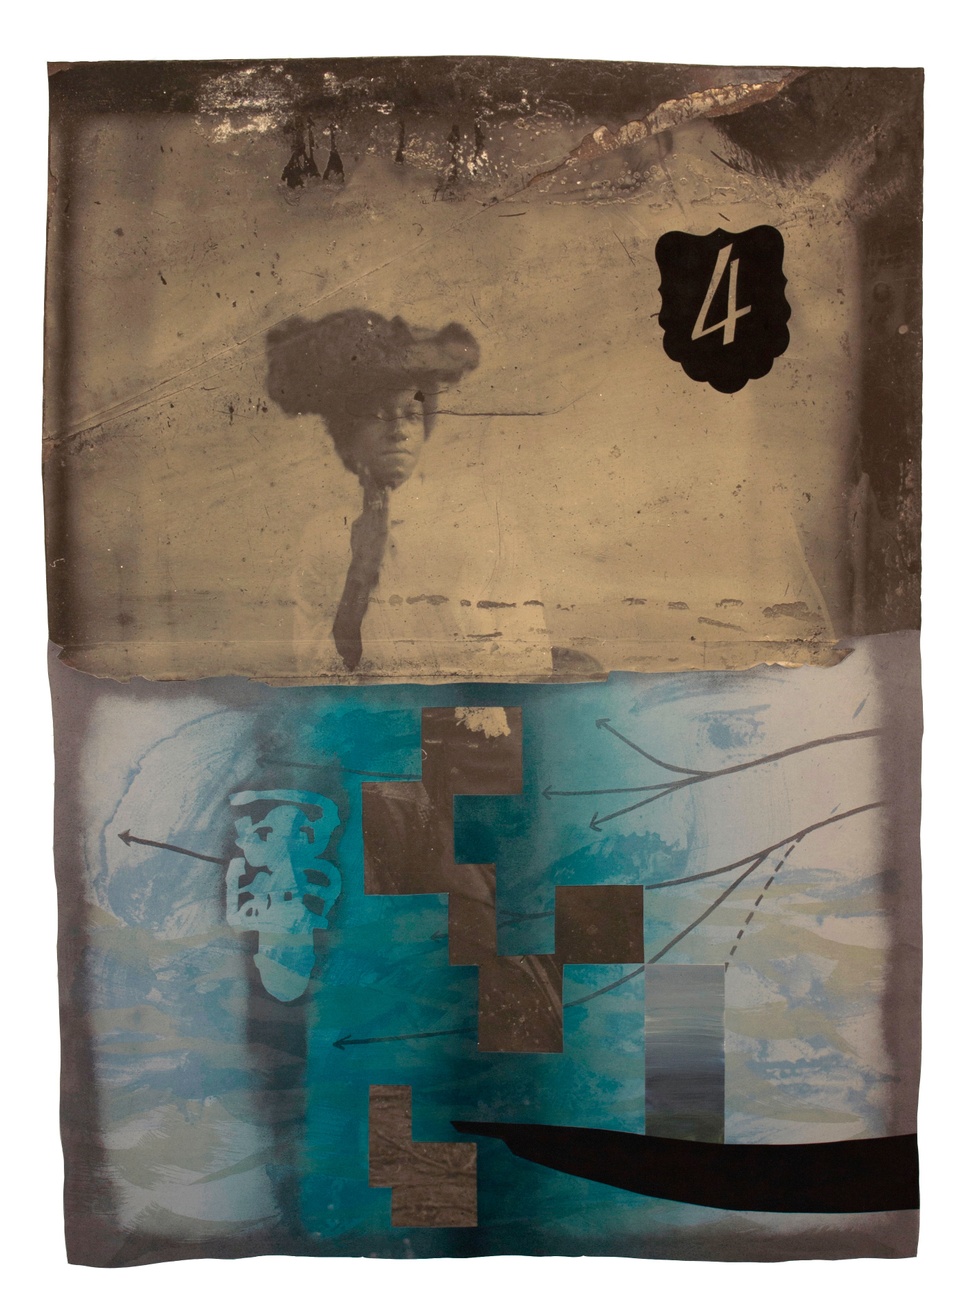 Image of photographed figure standing on the left of the frame with turquoise abstract shapes at the bottom and the number "4" in the top right corner of the image